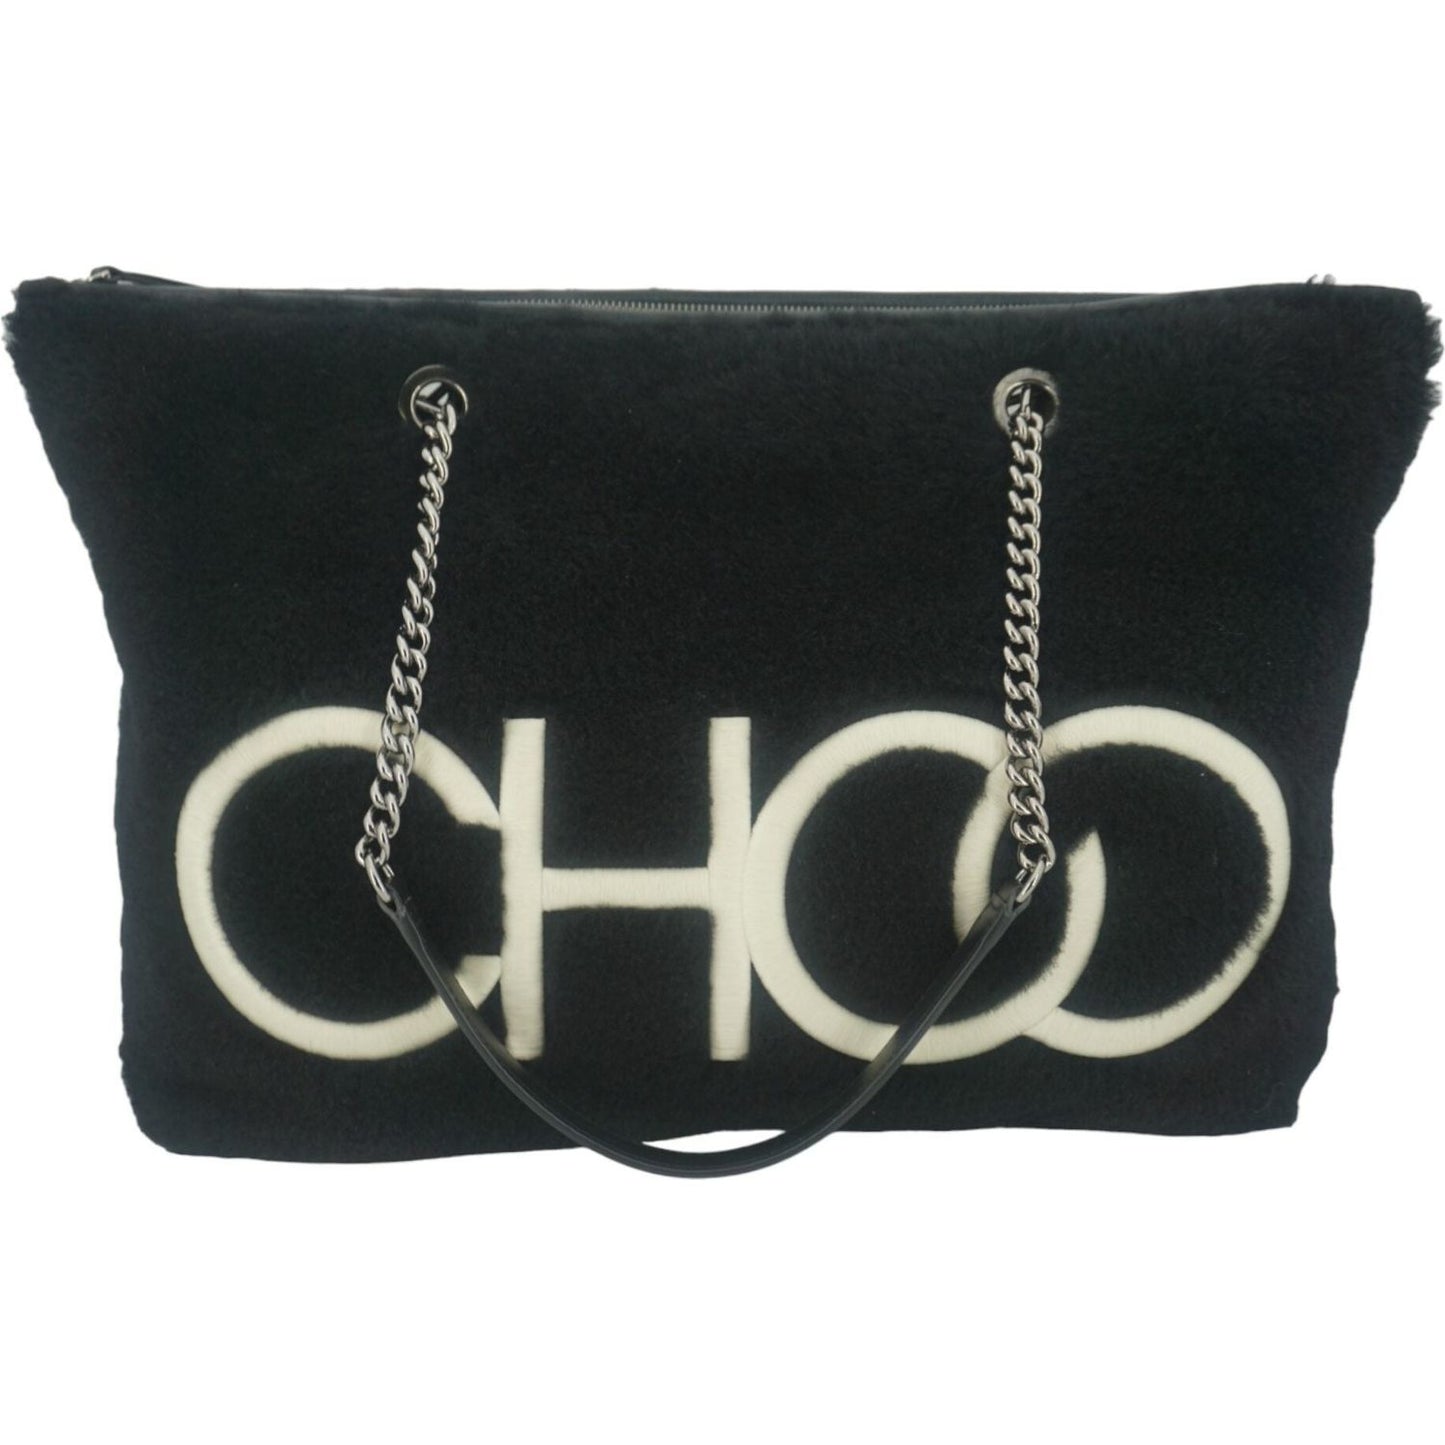 Jimmy Choo Black Leather and fabric Tote Shoulder Bag black-leather-and-fabric-tote-shoulder-bag